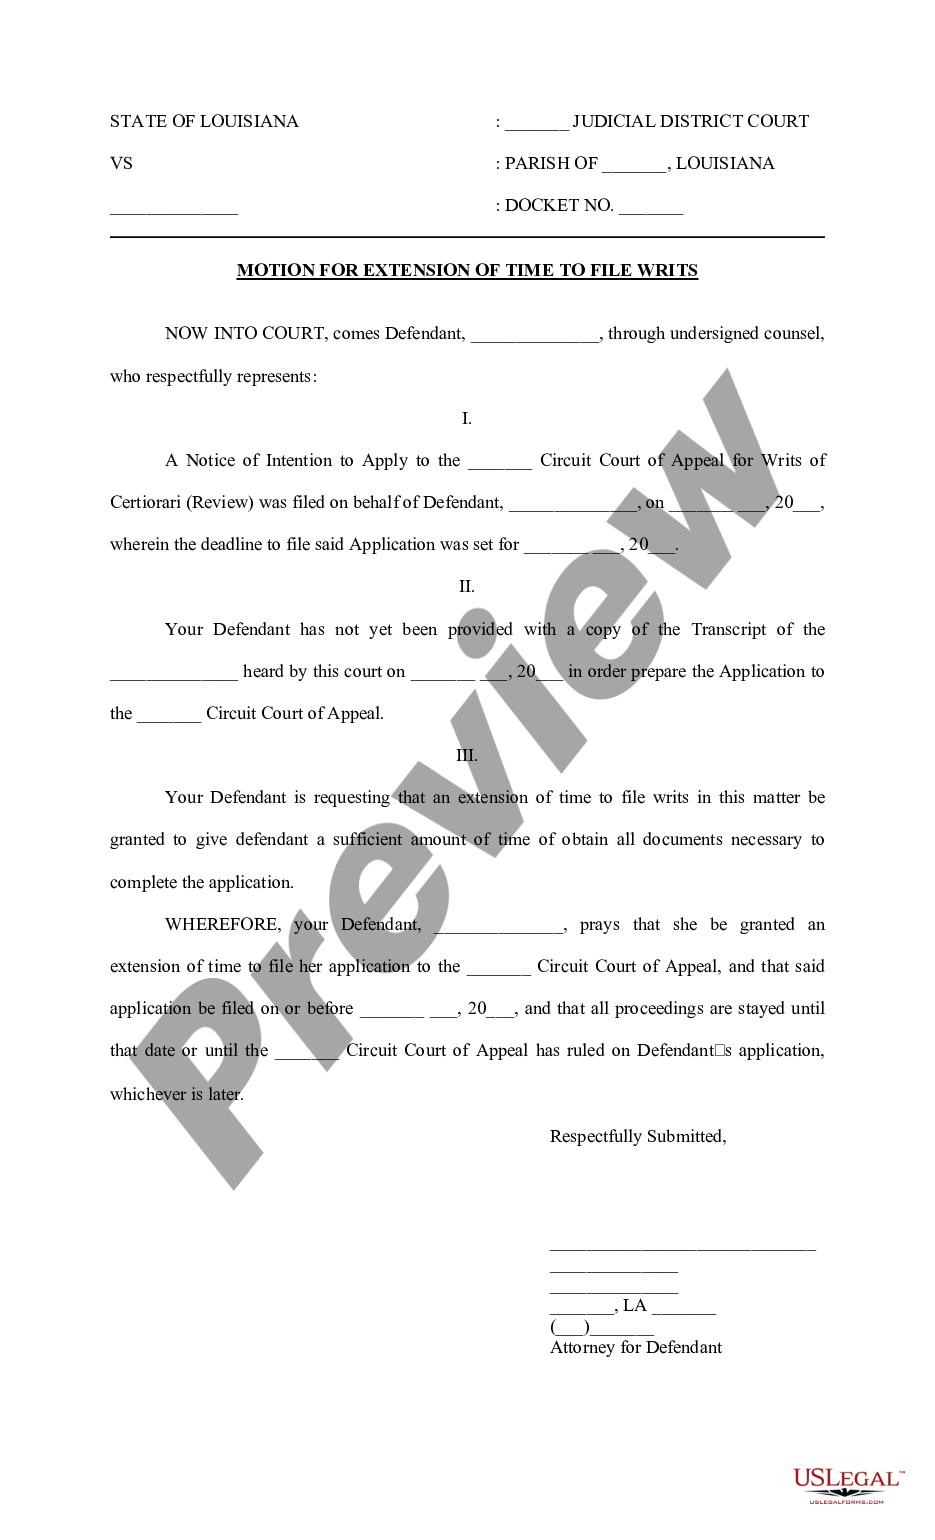 louisiana-motion-for-extension-of-time-to-file-writs-motion-extension